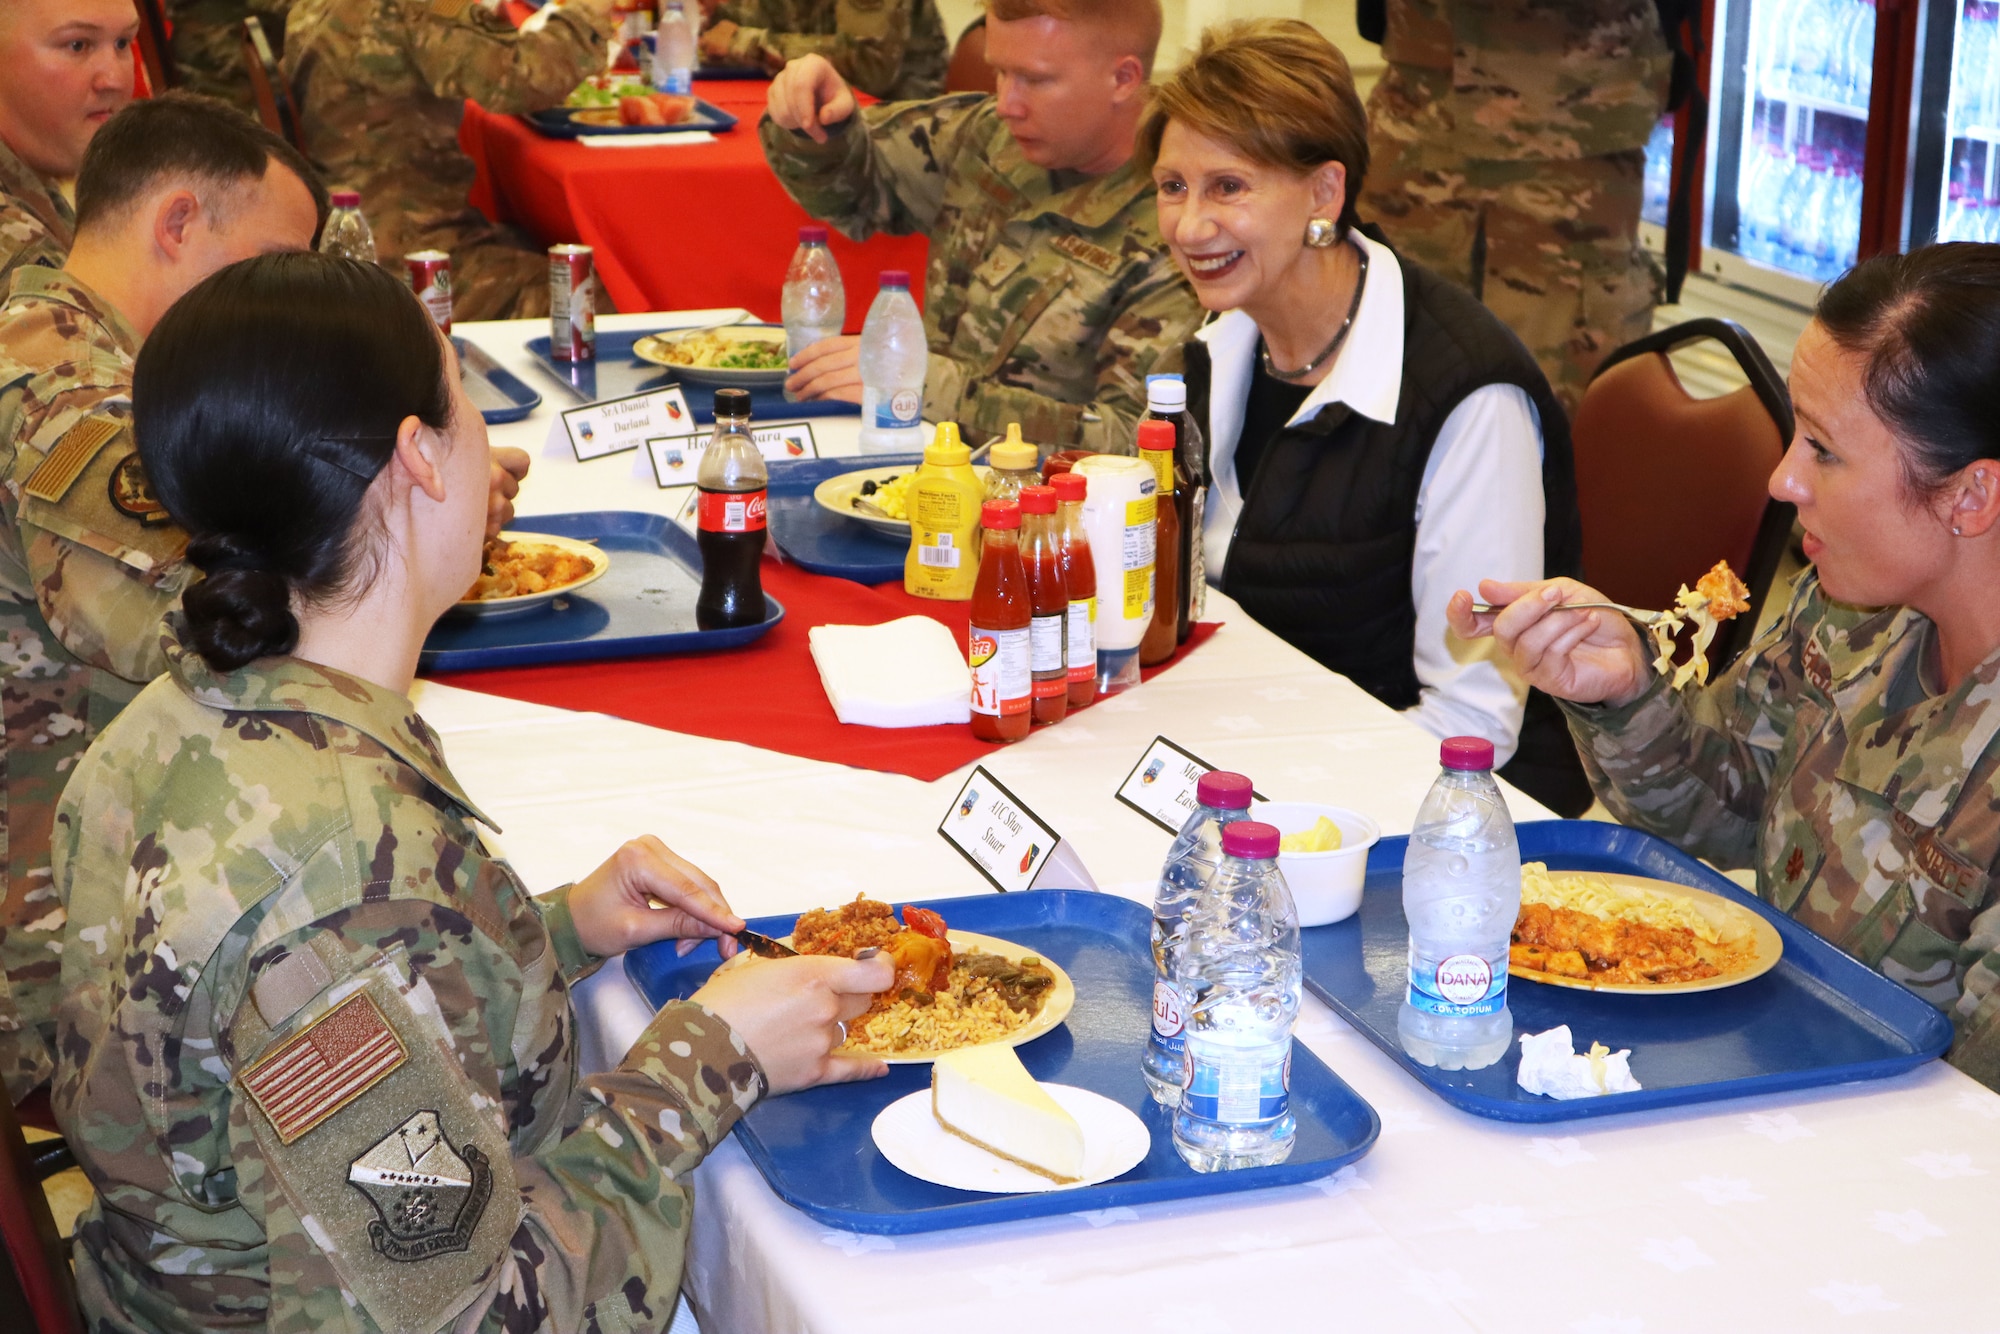 Secretary of the Air Force Barbara Barrett speaks with airmen who are deployed for the first time during a dinner at Blatchford-Preston Complex dinning facility at Al Udeid Air Base, Qatar on Nov. 17, 2019. During their first overseas trip, Barrett and Air Force Chief of Staff Gen. David L. Goldfein met with AUAB and Qatari leadership, held an all-call where they spoke to readiness, lethality and the future of the U.S. Air Force and visited Airmen and the facilities where they work and live.(U.S. Air Force photo by Tech. Sgt. Ian Dean)